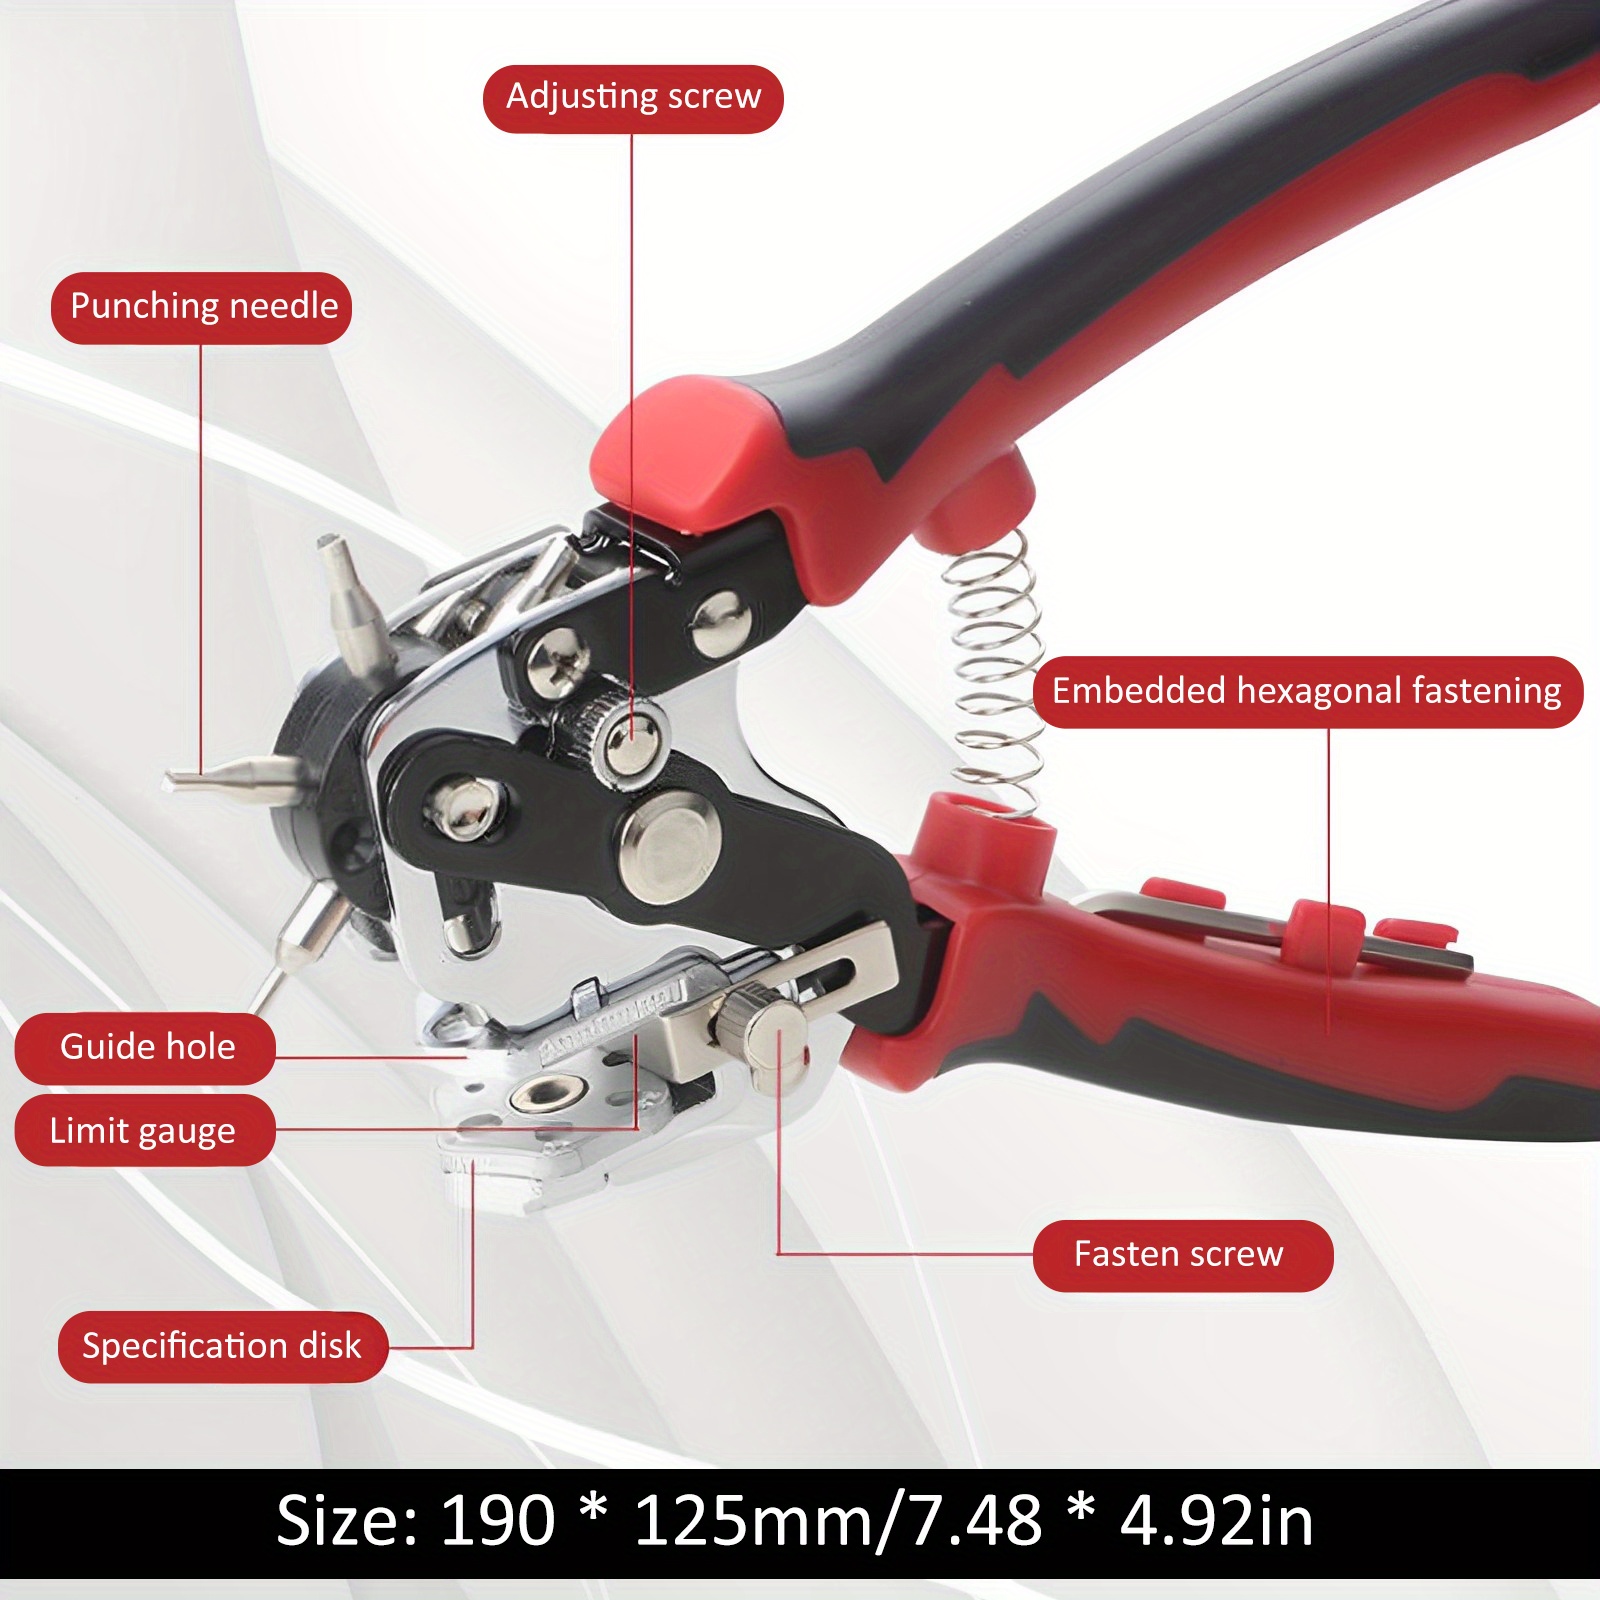 

Leather Hole Punch Tool Stainless Steel Belt Hole Puncher With 6 Holes Adjustable Hole Punch Tool Pliers With Limiter Handheld Leather Punch Tool For Fabric Belts Plastic Paper